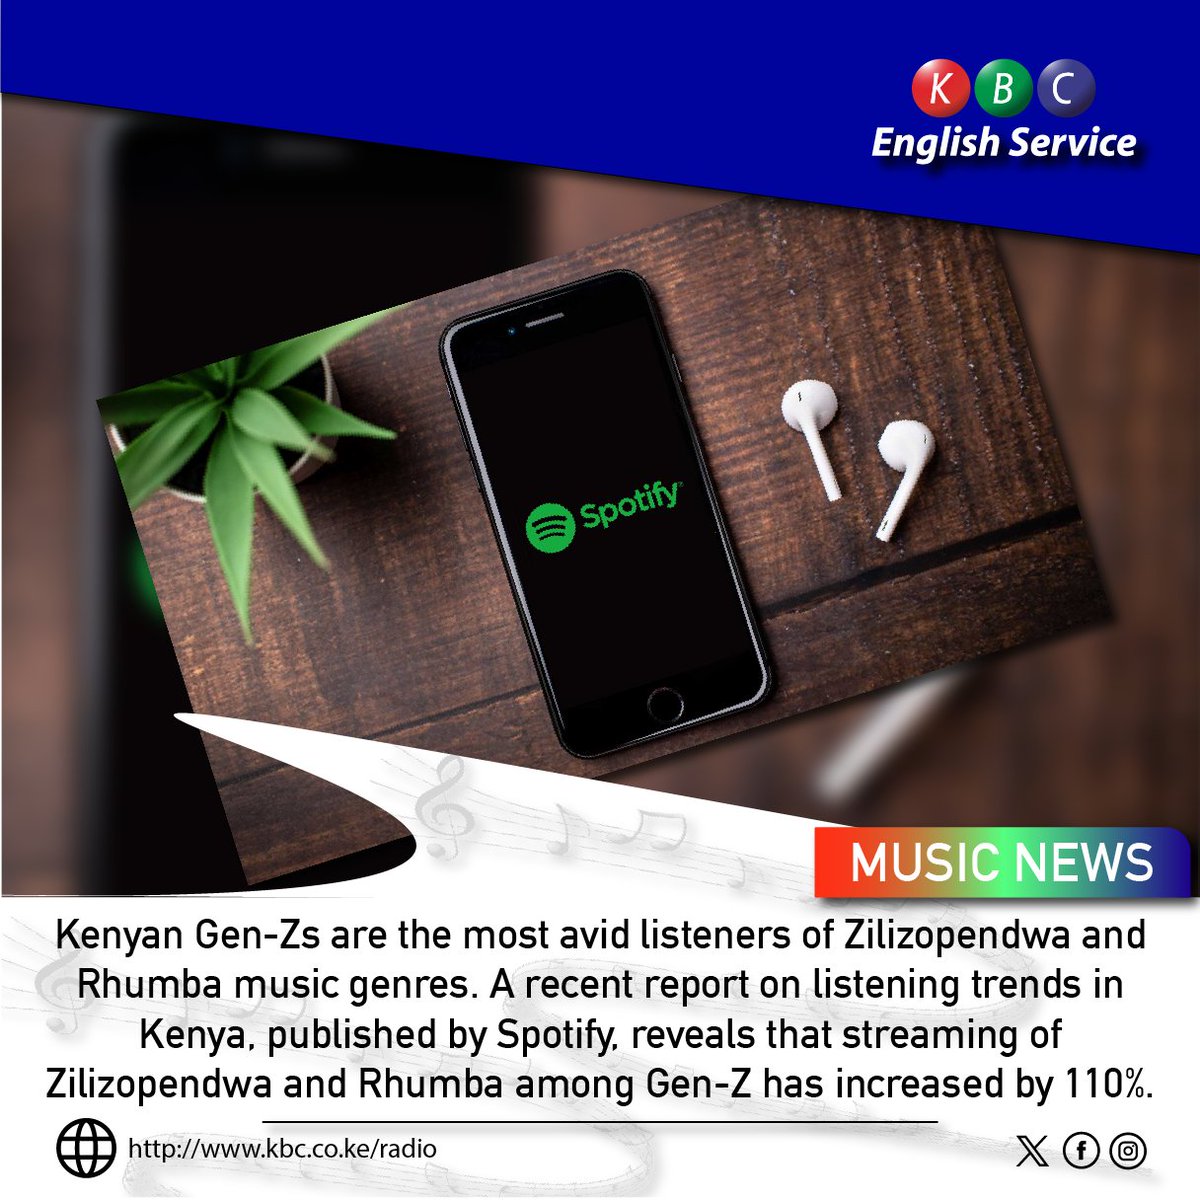 Kenyan Gen-Zs are the most avid listeners of Zilizopendwa and Rhumba music genres. A recent report on listening trends in Kenya, published by Spotify, reveals that streaming of Zilizopendwa and Rhumba among Gen-Z has increased by 110%. ^PMN #KBCEnglishService